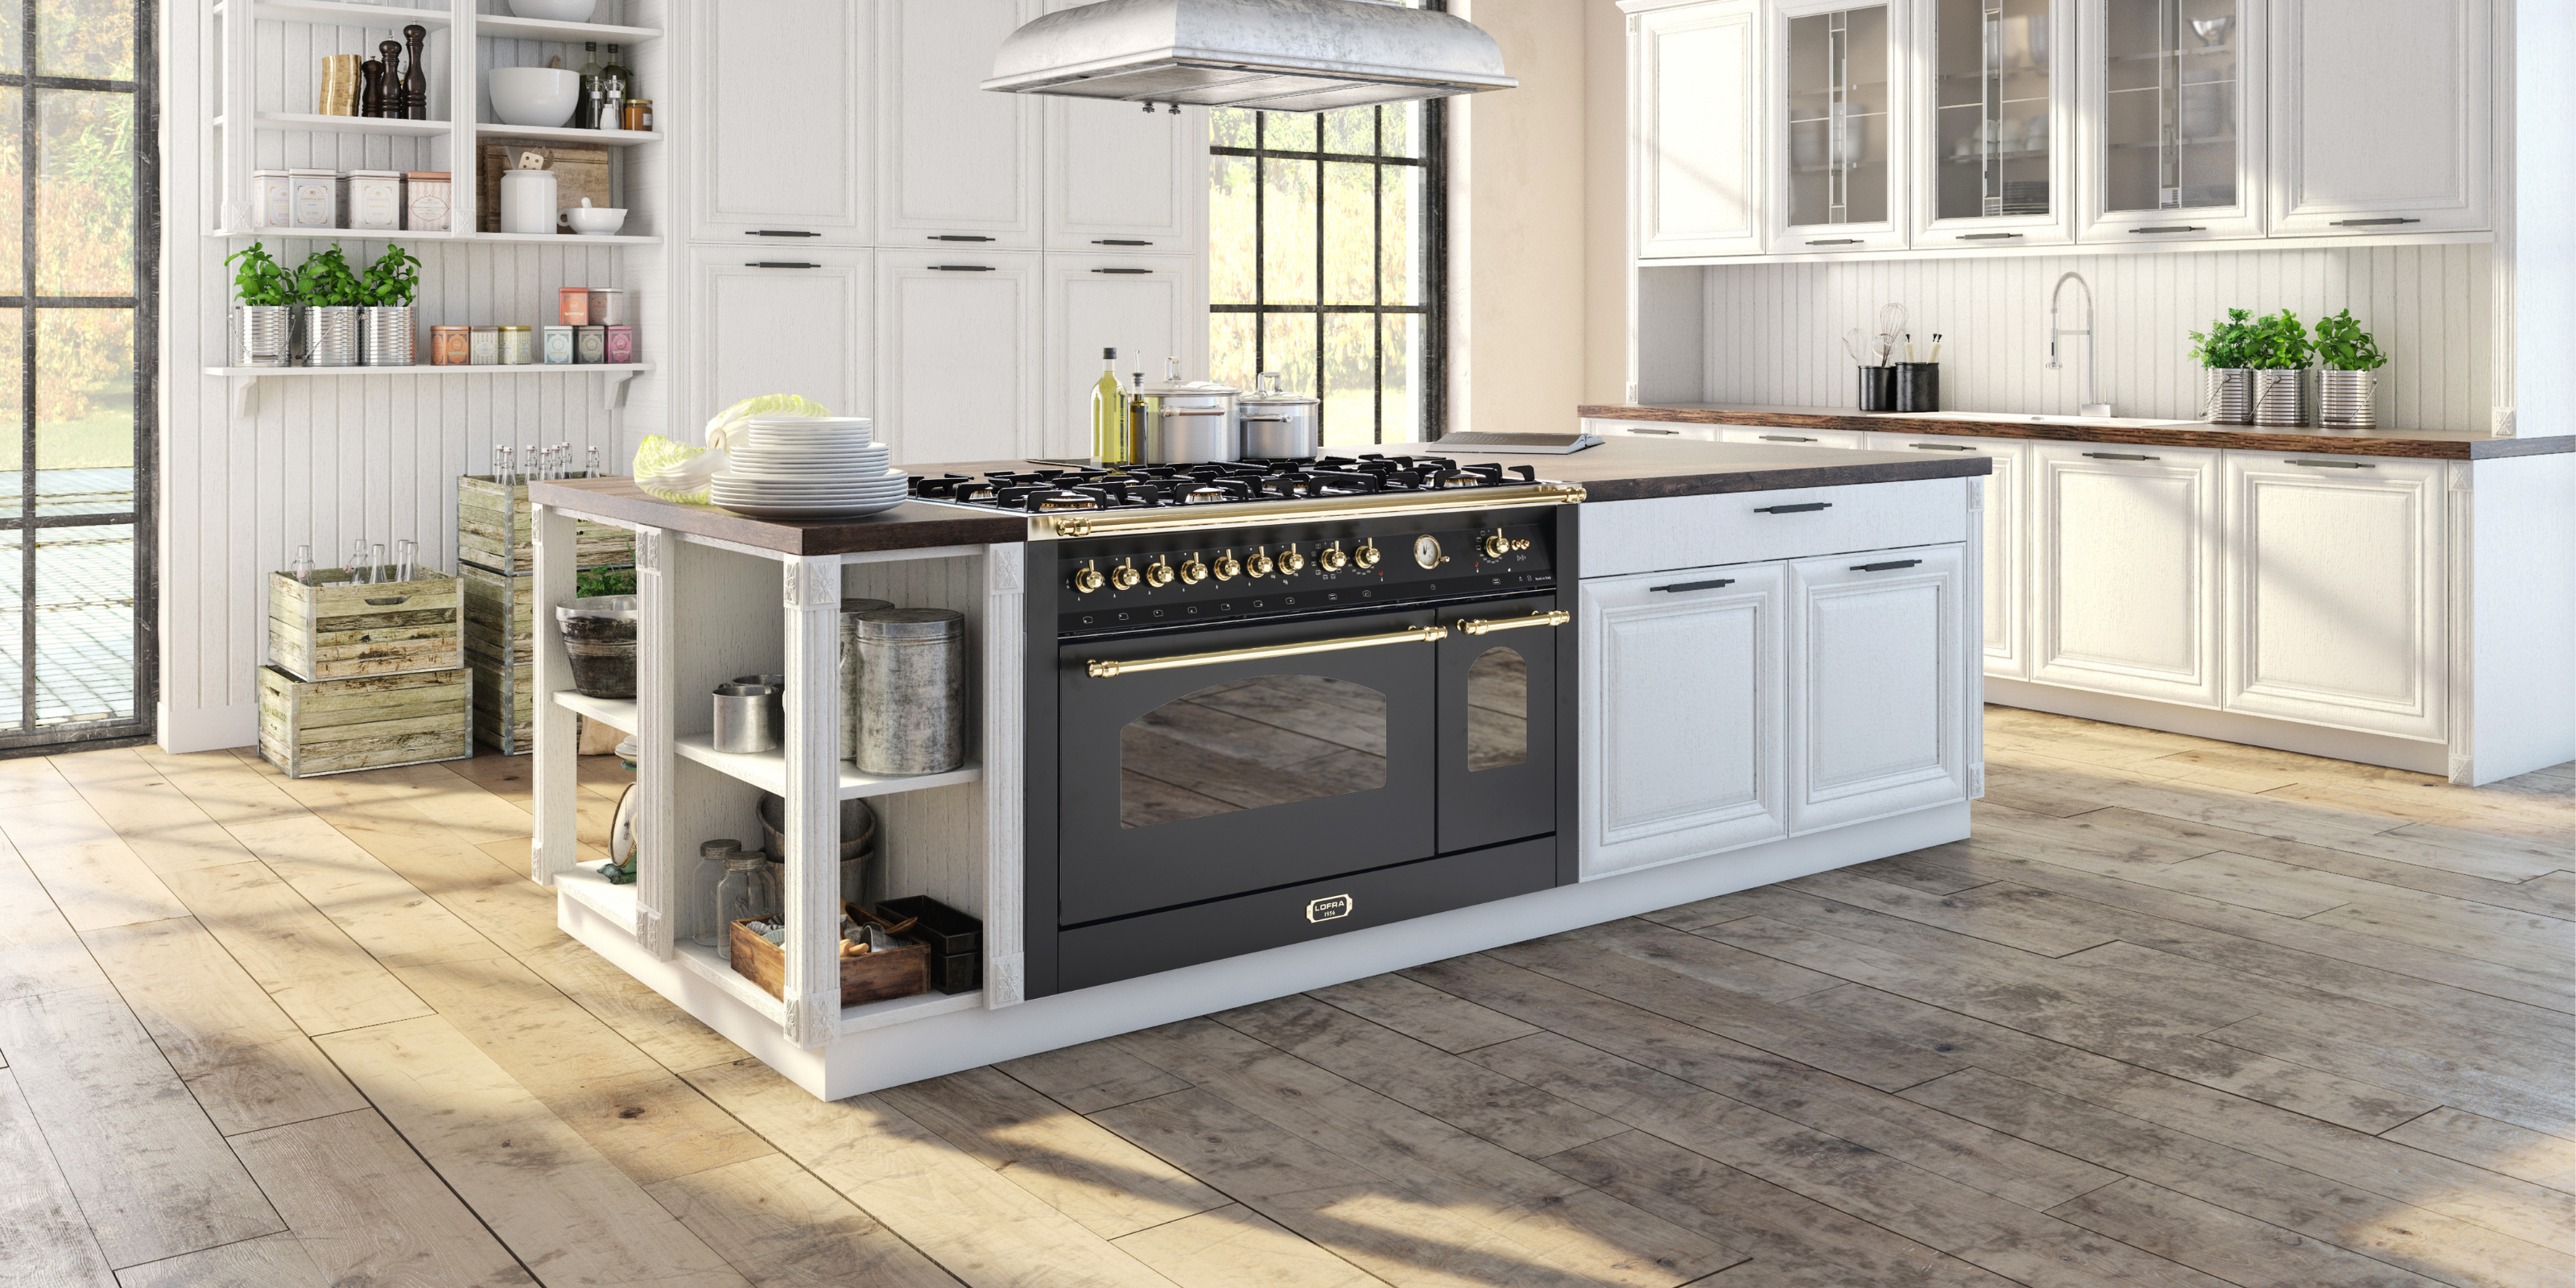 Dolcevita - Lofra Cookers